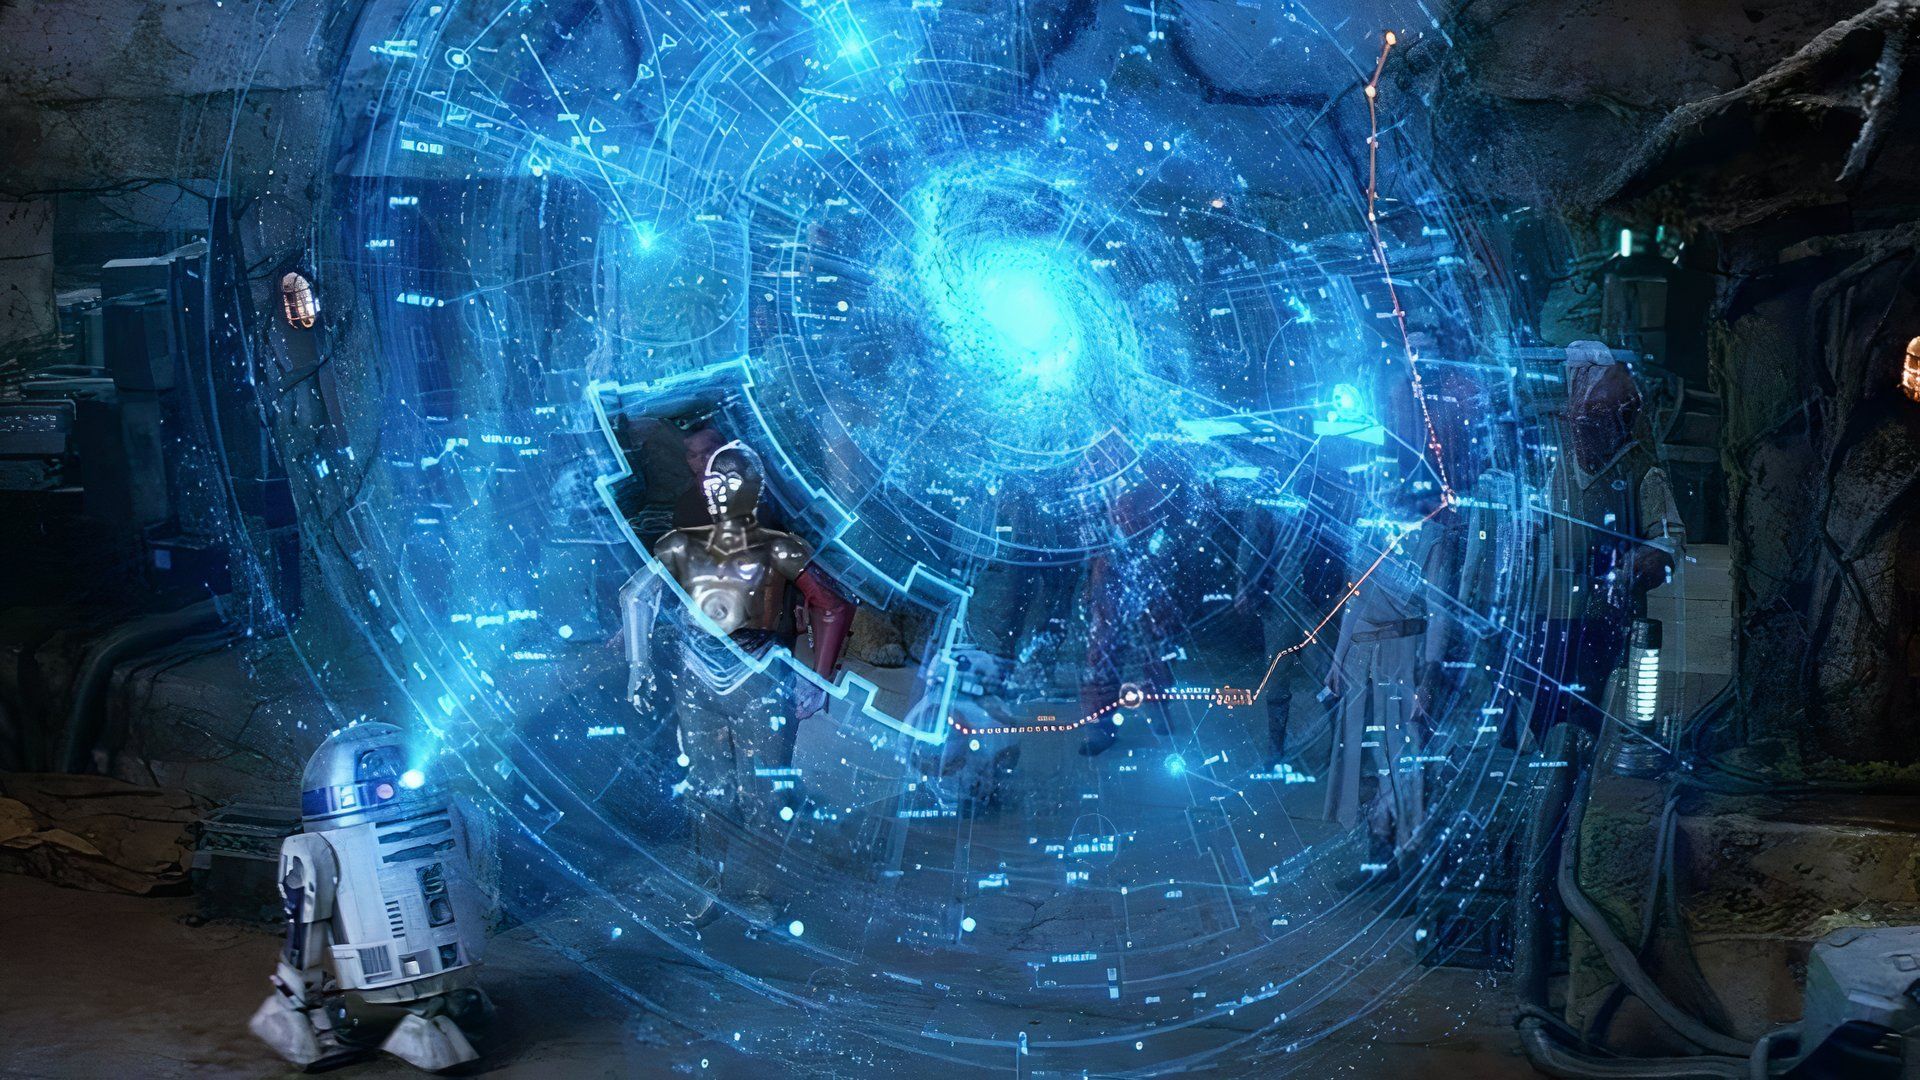 R2D2 displays the map to Luke Skywalker in The Force Awakens